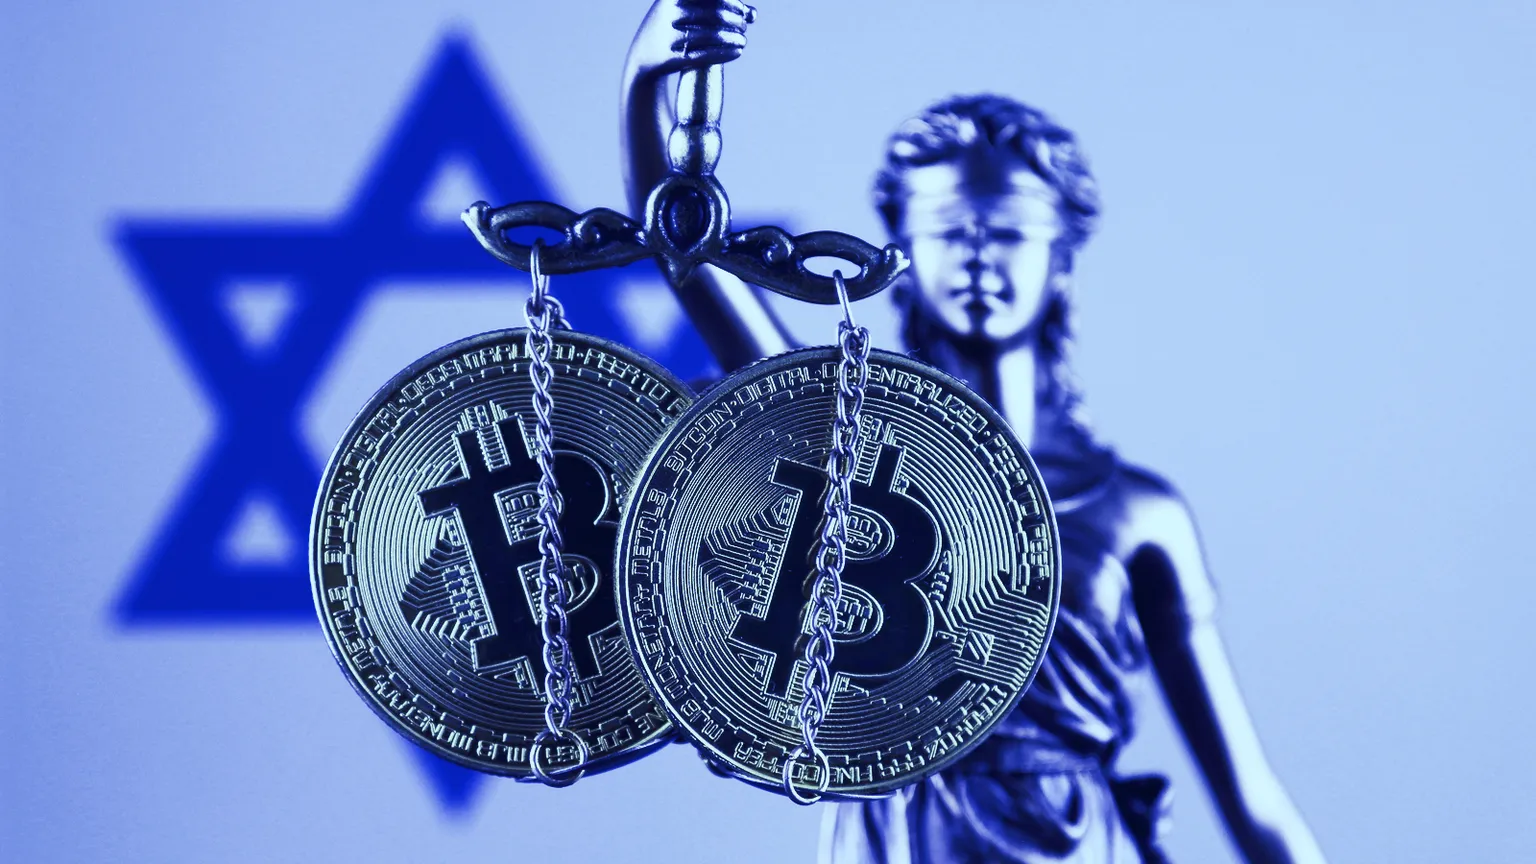 Israeli crypto exchange sues wallet company on allegations of fraud. Image: Shutterstock.